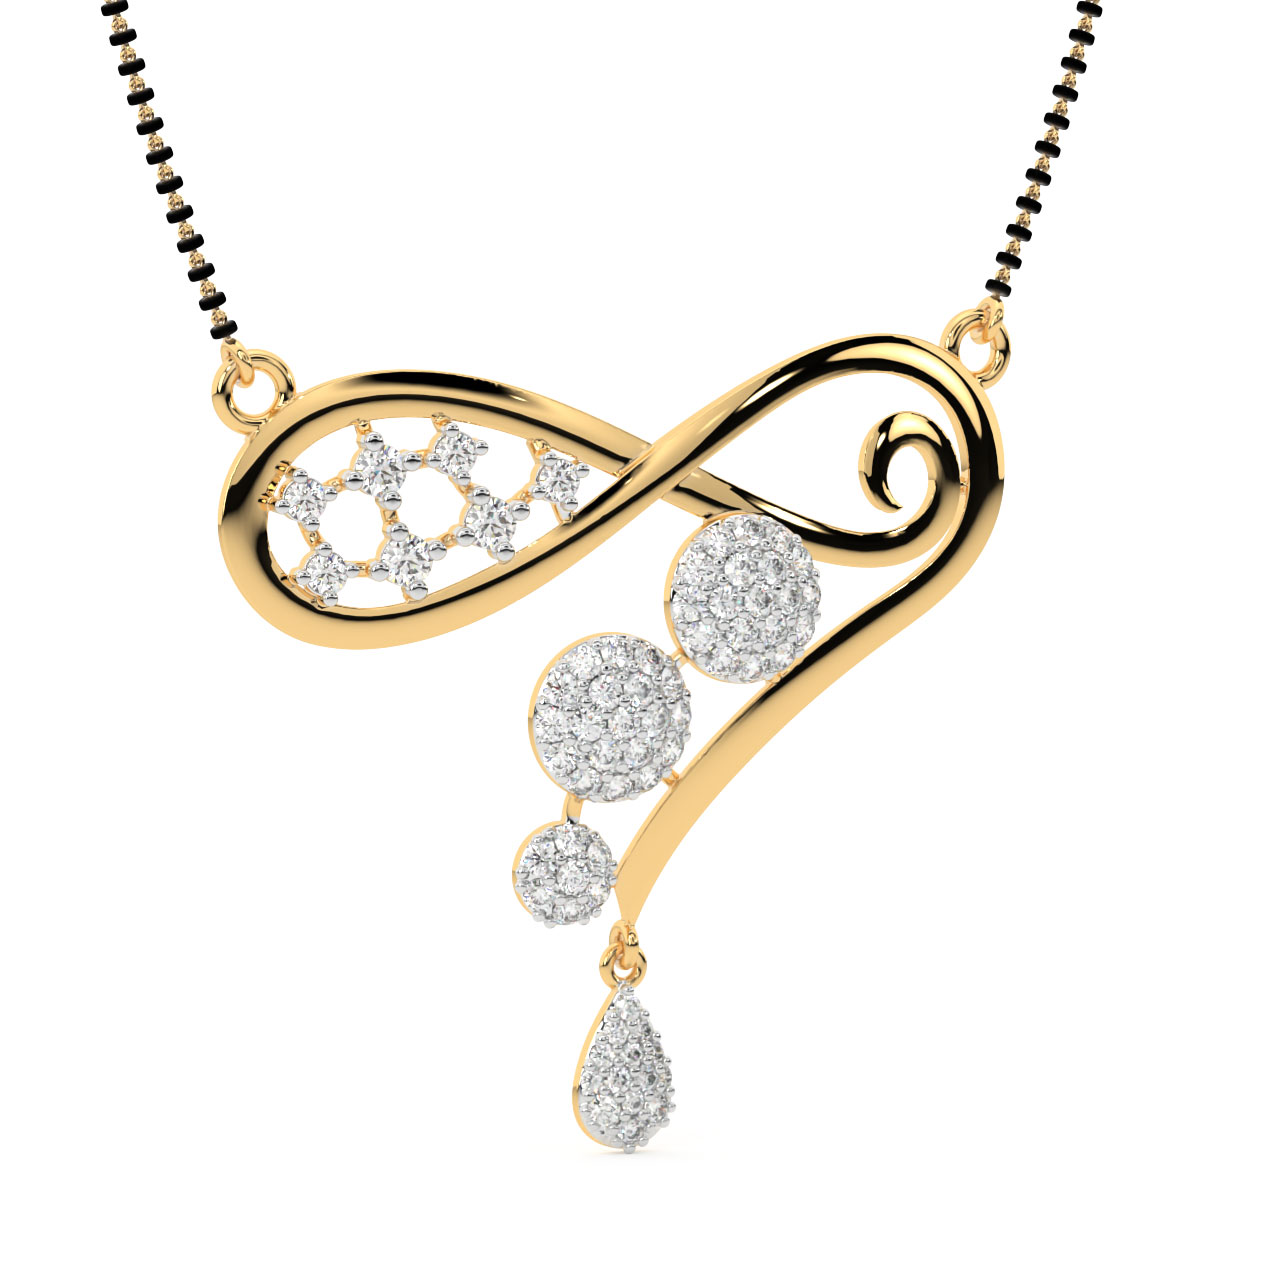 Mangalsutra Design With Infinity Shape